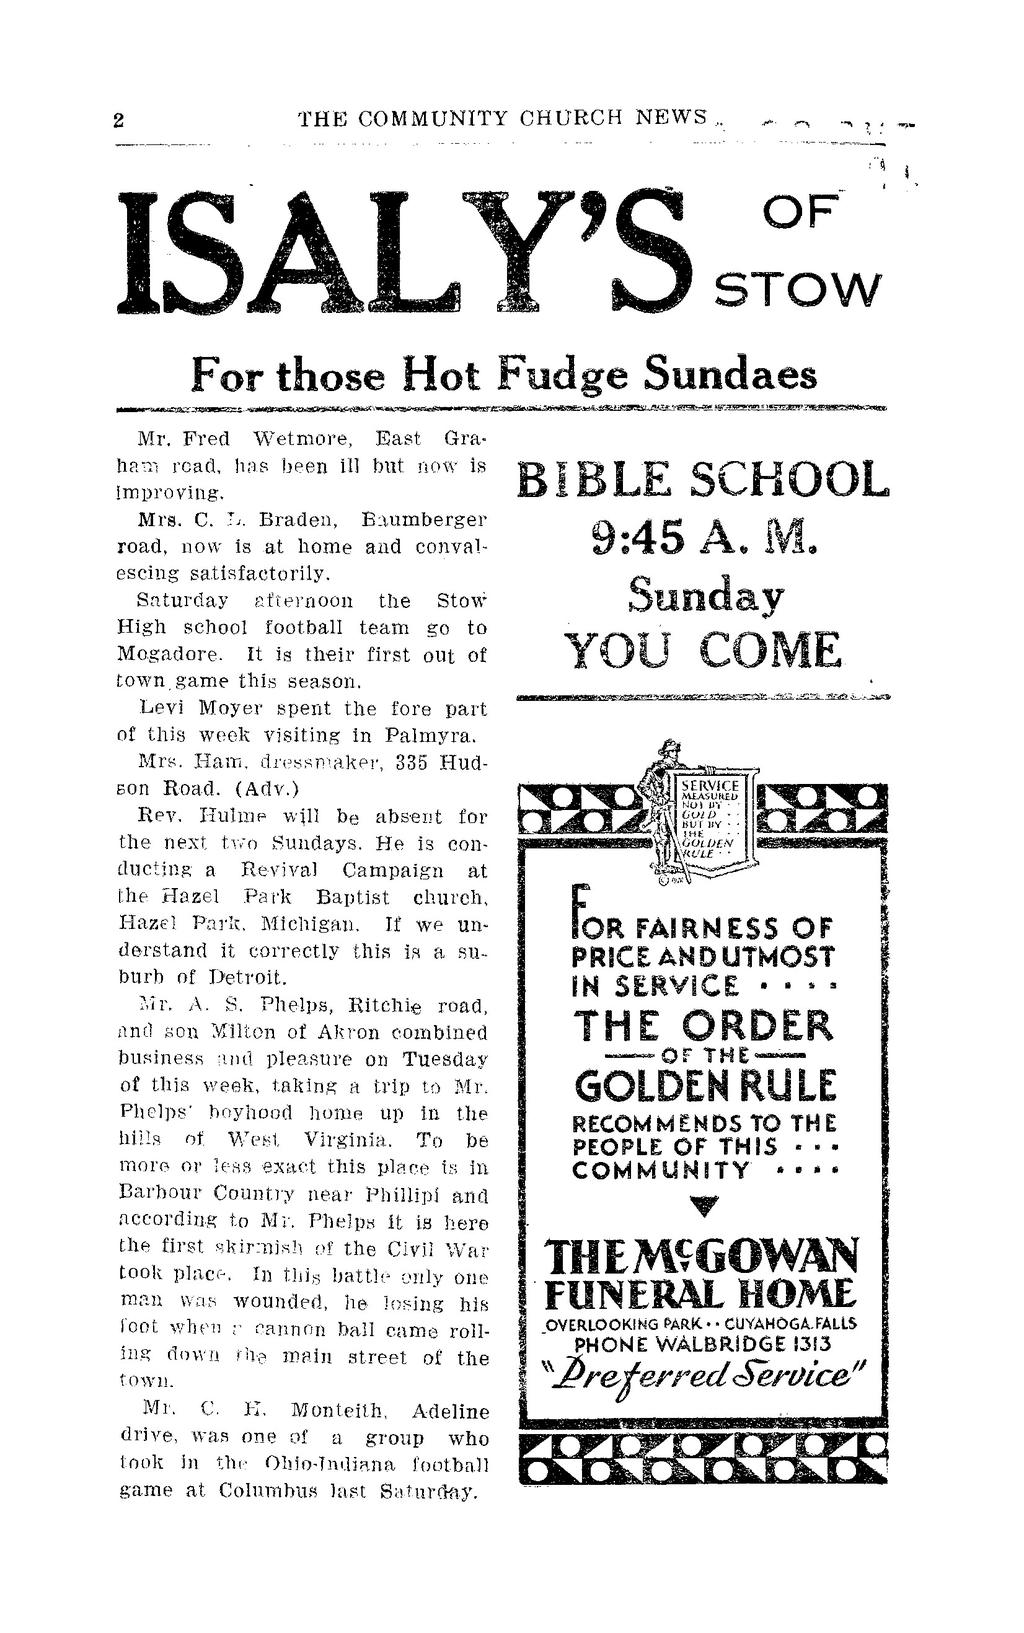 THE- COMMUNITY CHURCH NEW. 5 For those Hot Fudge Sundaes Mr. Fred Wetmore, East Graham read, has been ill but now is improving. Mrs. C. Braden, Baumberger road, now is at home and convalescing satisfactorily.